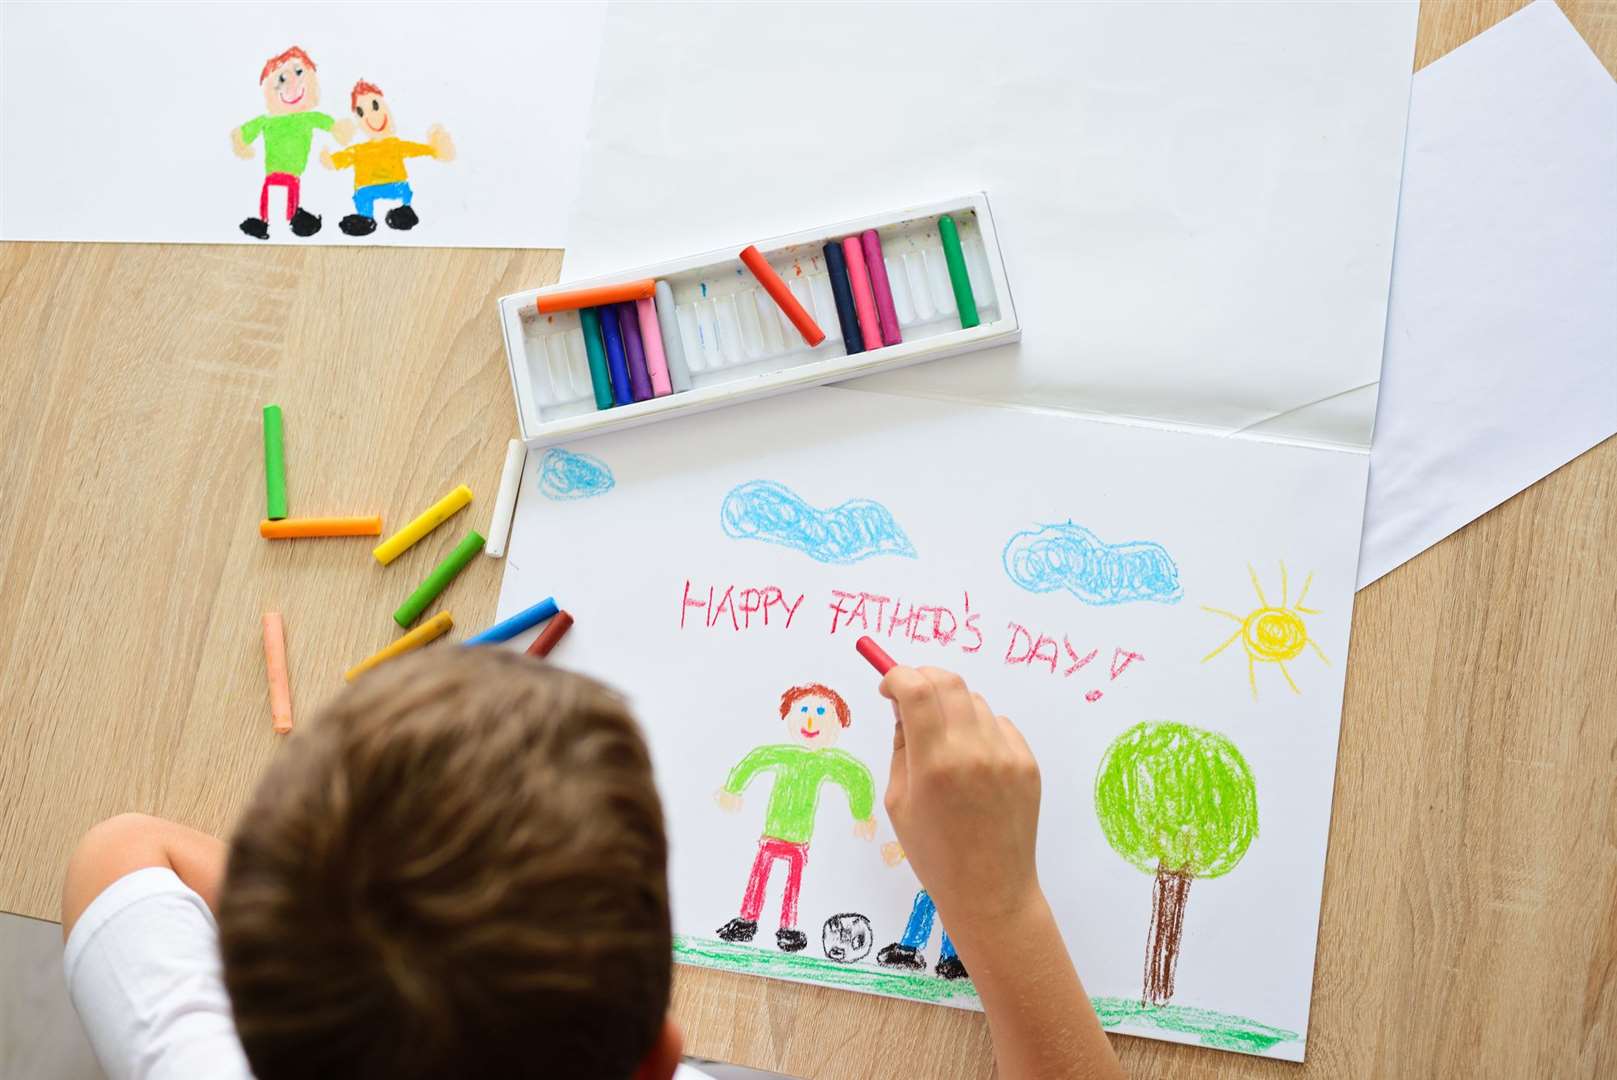 Send us your child's drawing of their dad for Father's Day